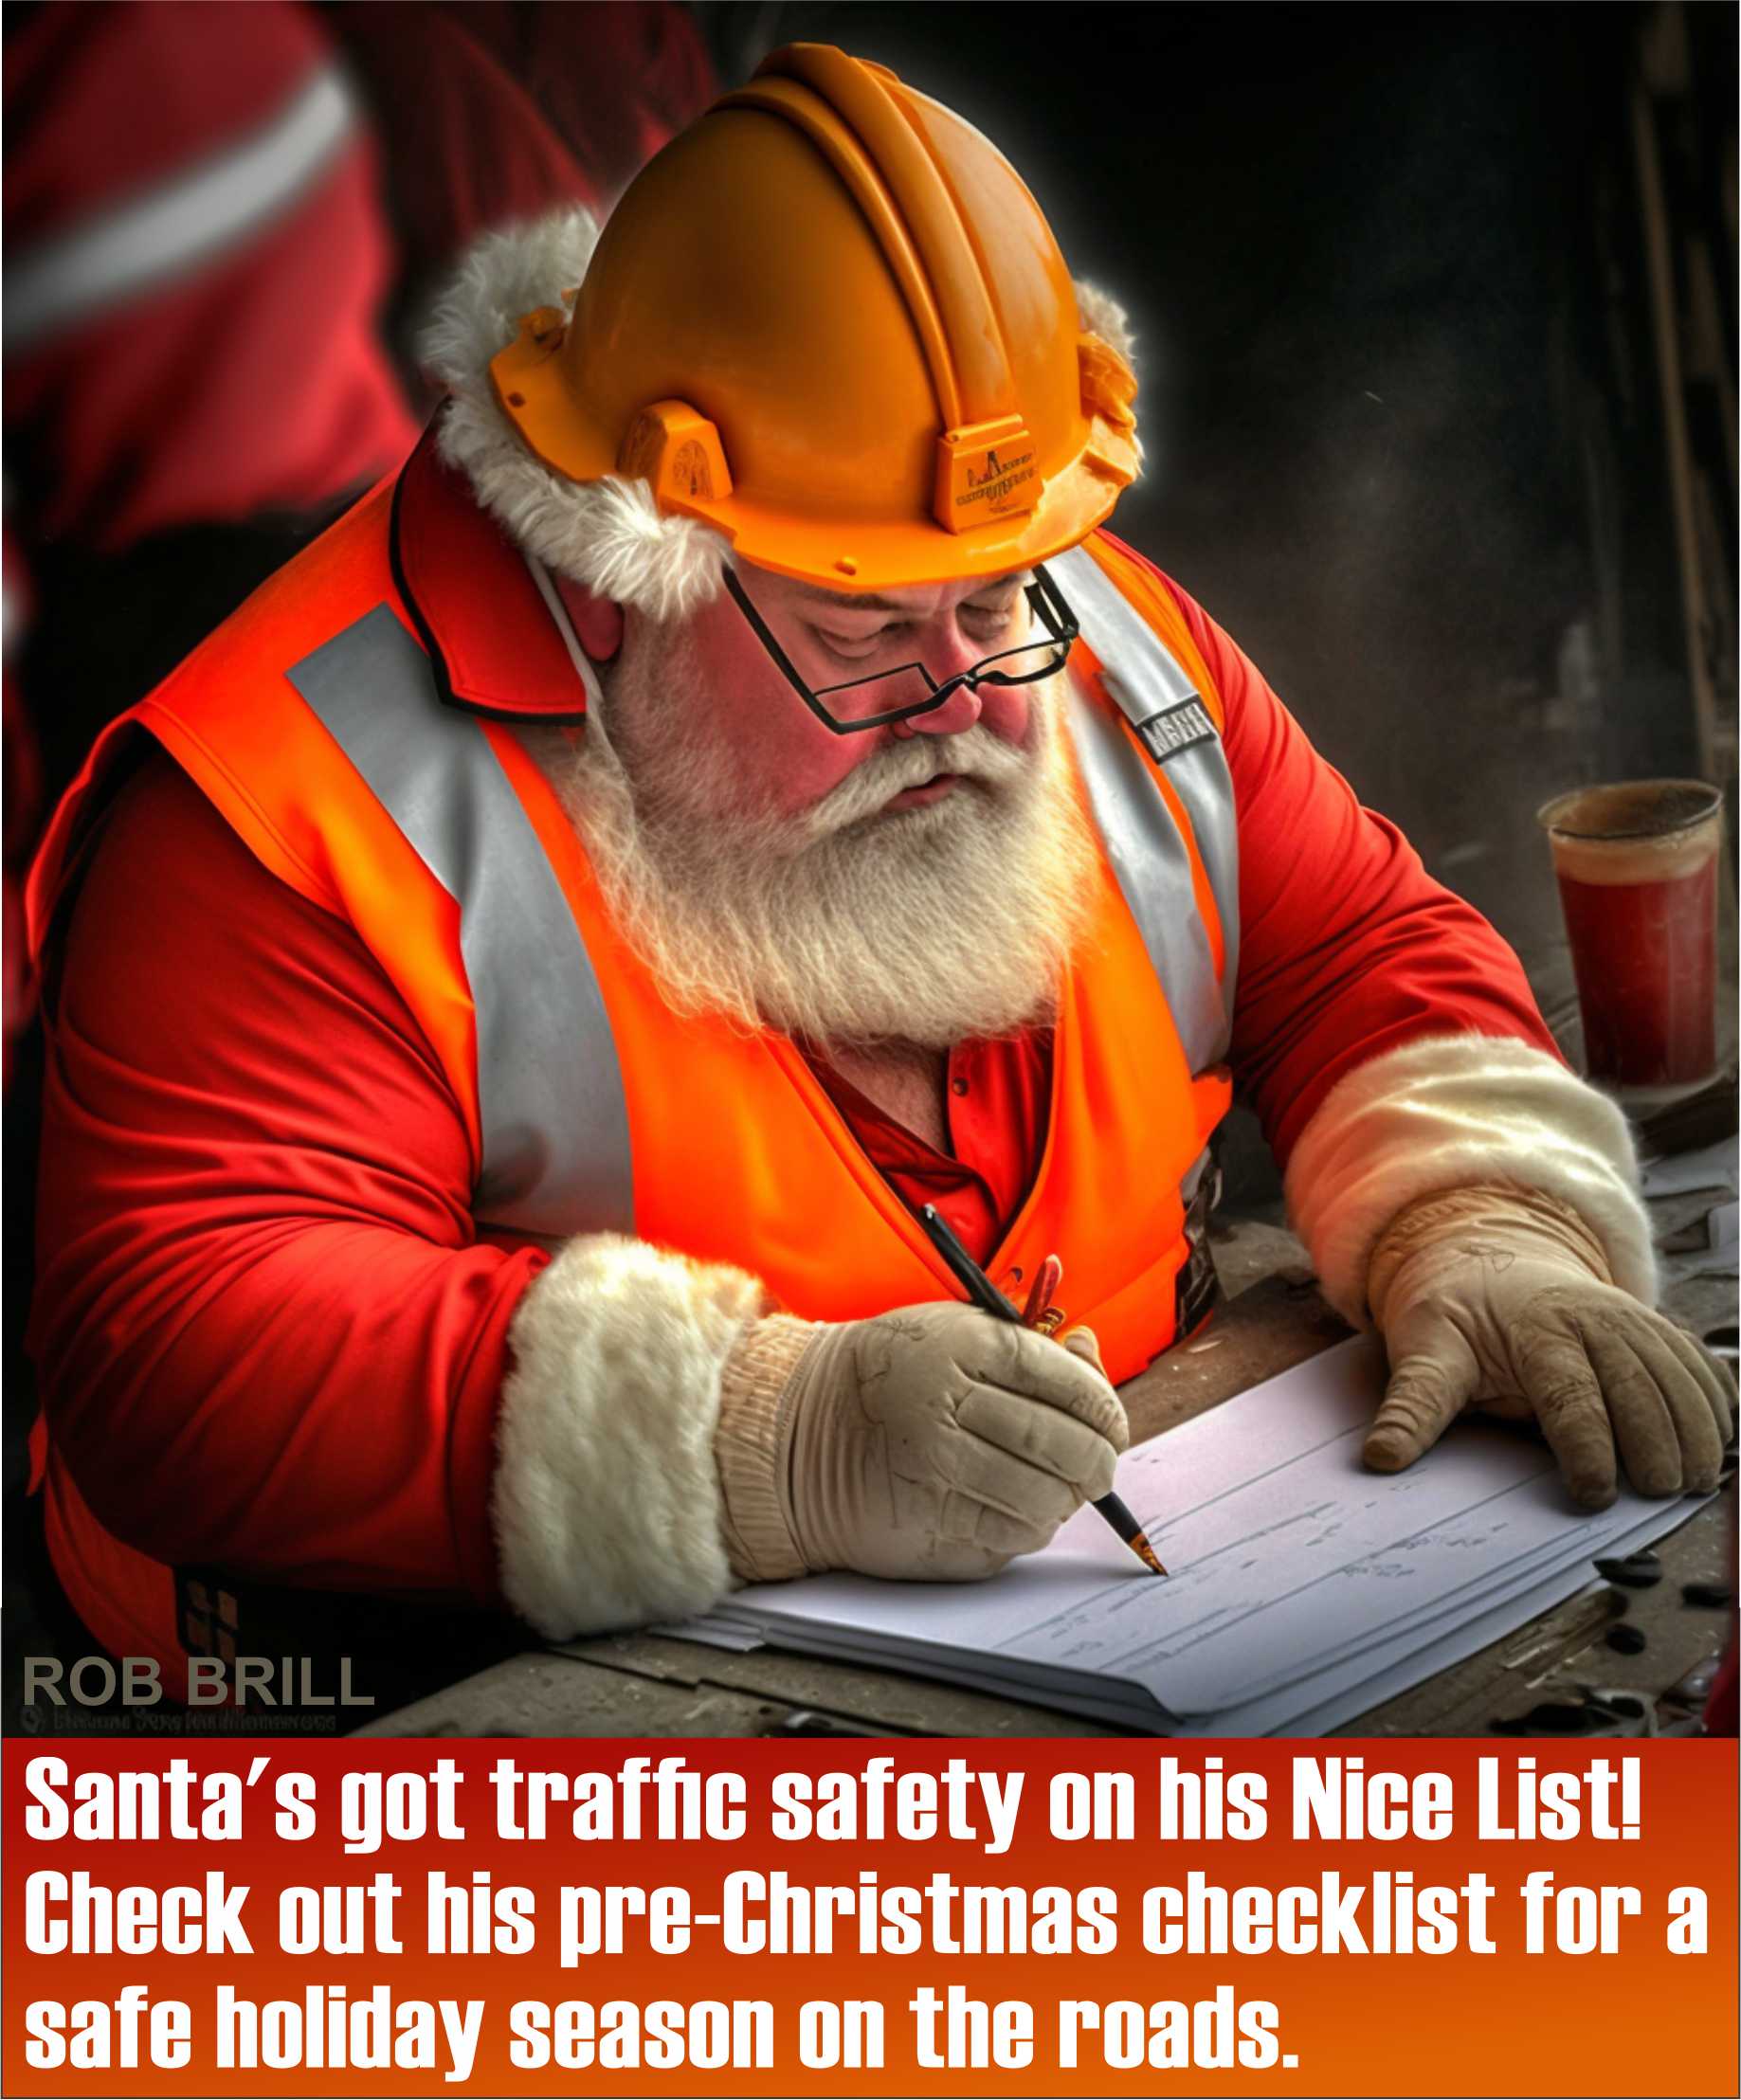 santa clause in work zone gear making a holiday driving checklist 